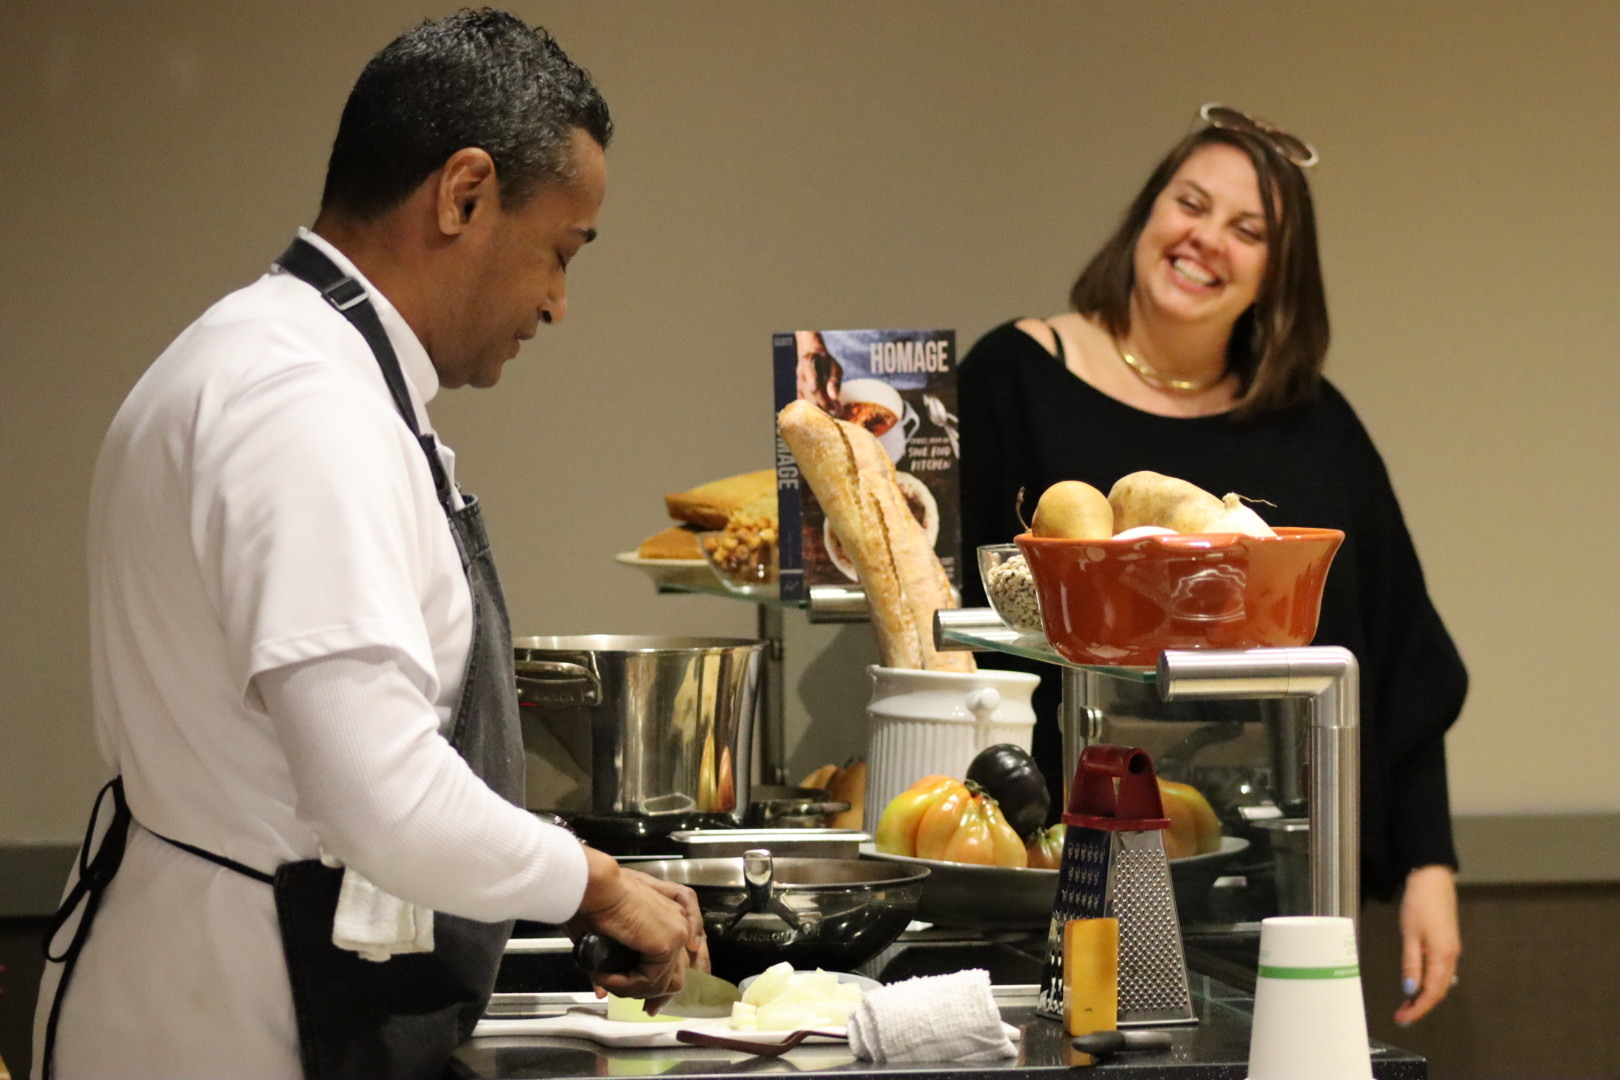 Chef Chris Scott gave a cooking demonstration, while Dr. Kelley Fanto Deetz, right, spoke about the legacy of enslaved cooks on the development of American cuisine.